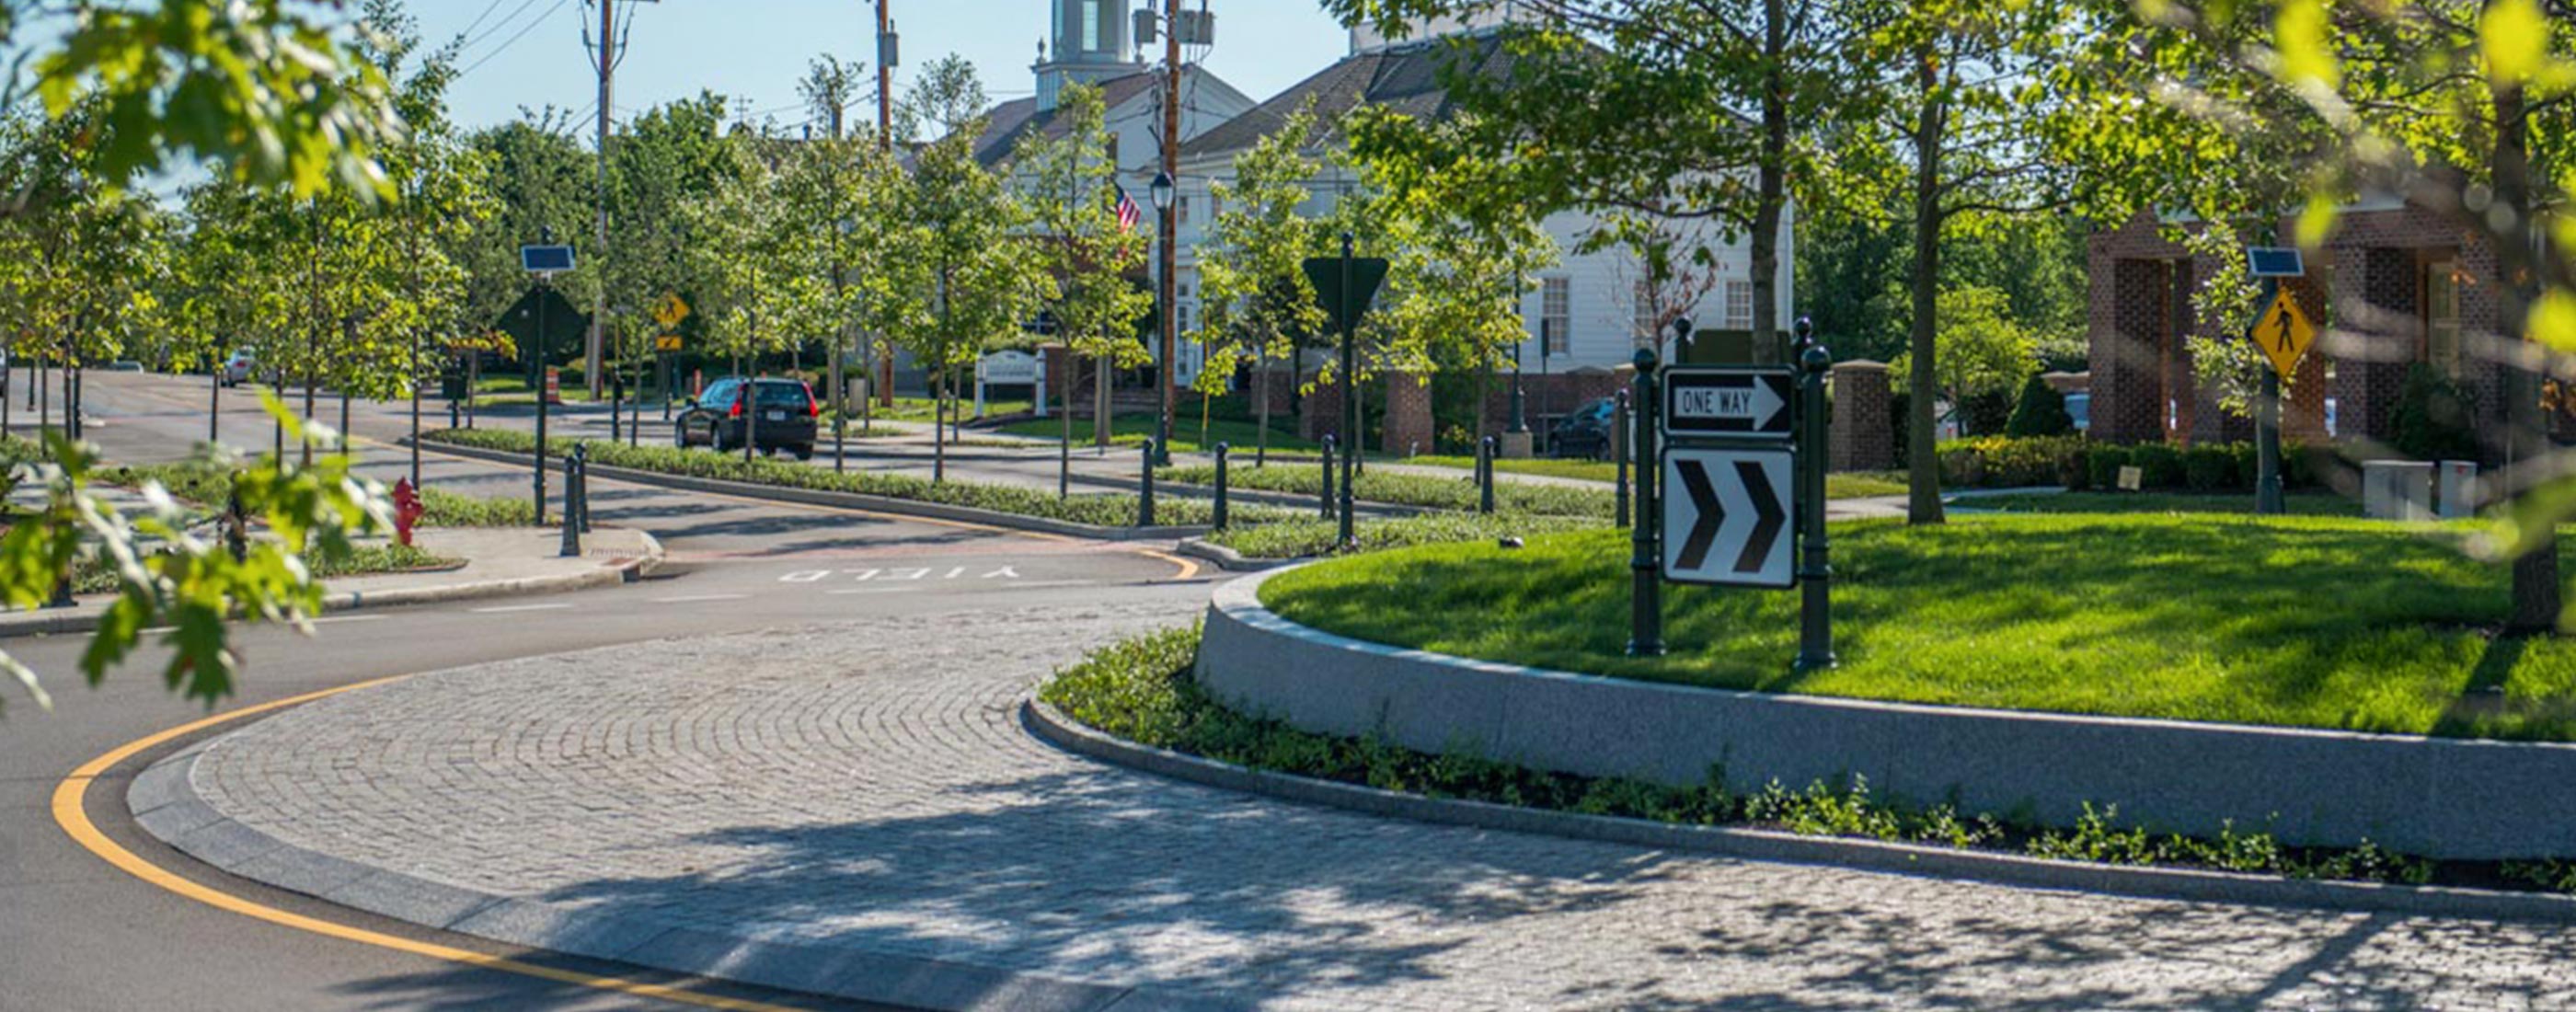 The center of New Albany, Ohio central roundabout, designed by OHM Advisors, is anchored by trees and a low granite wall.